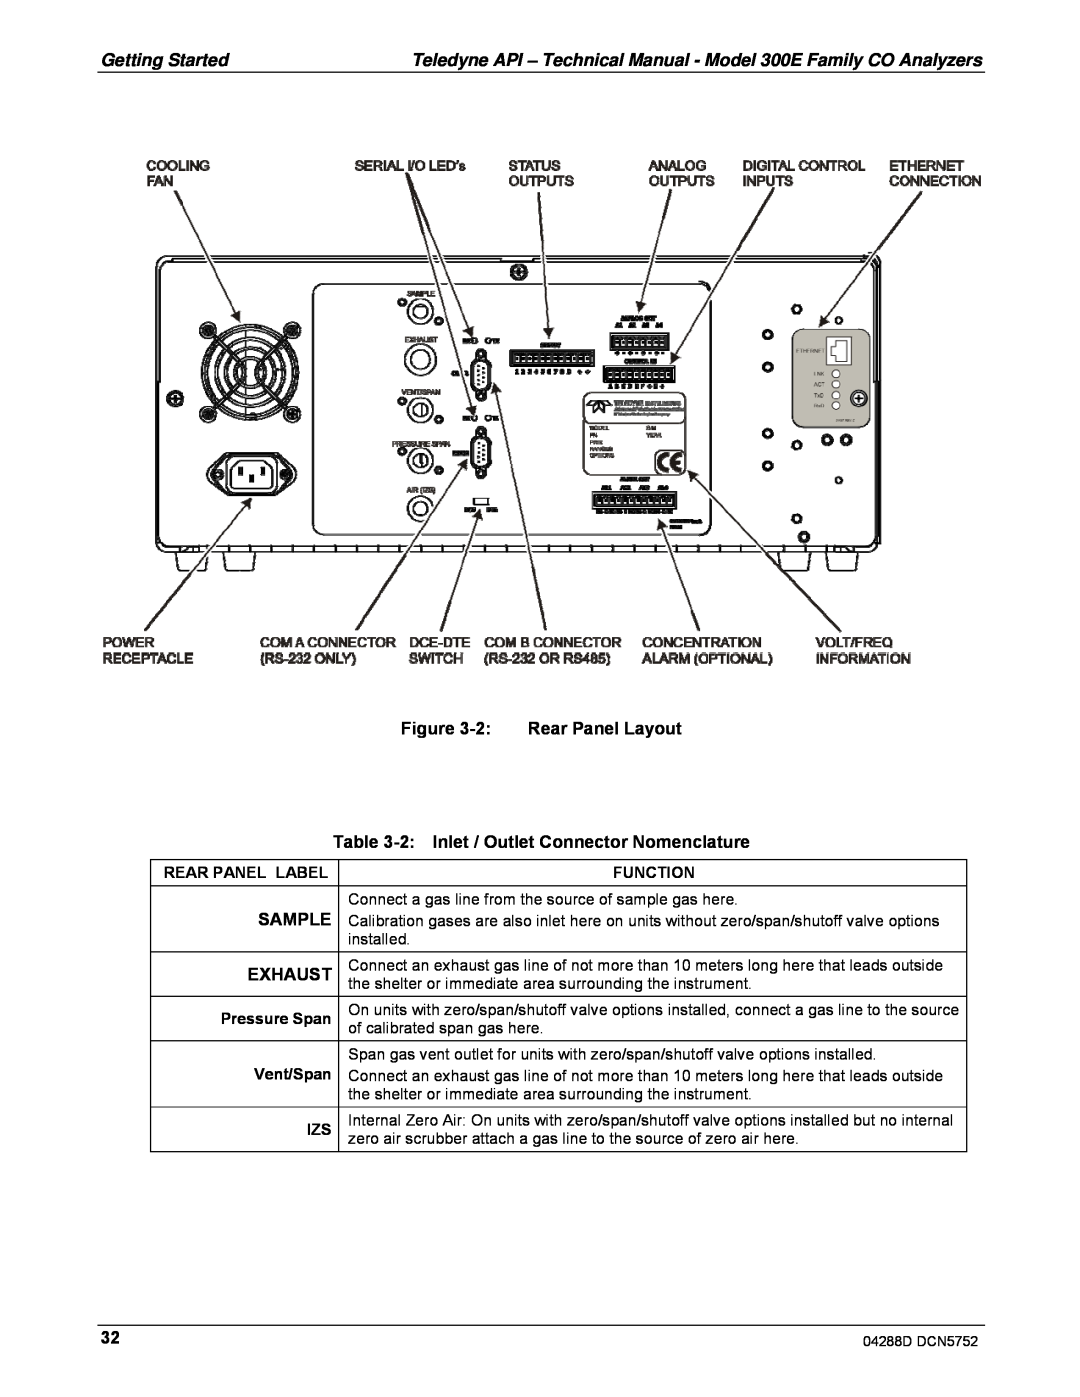 Teledyne M300EM operation manual Figure, Rear Panel Layout, 2:Inlet / Outlet Connector Nomenclature, Sample, Exhaust 